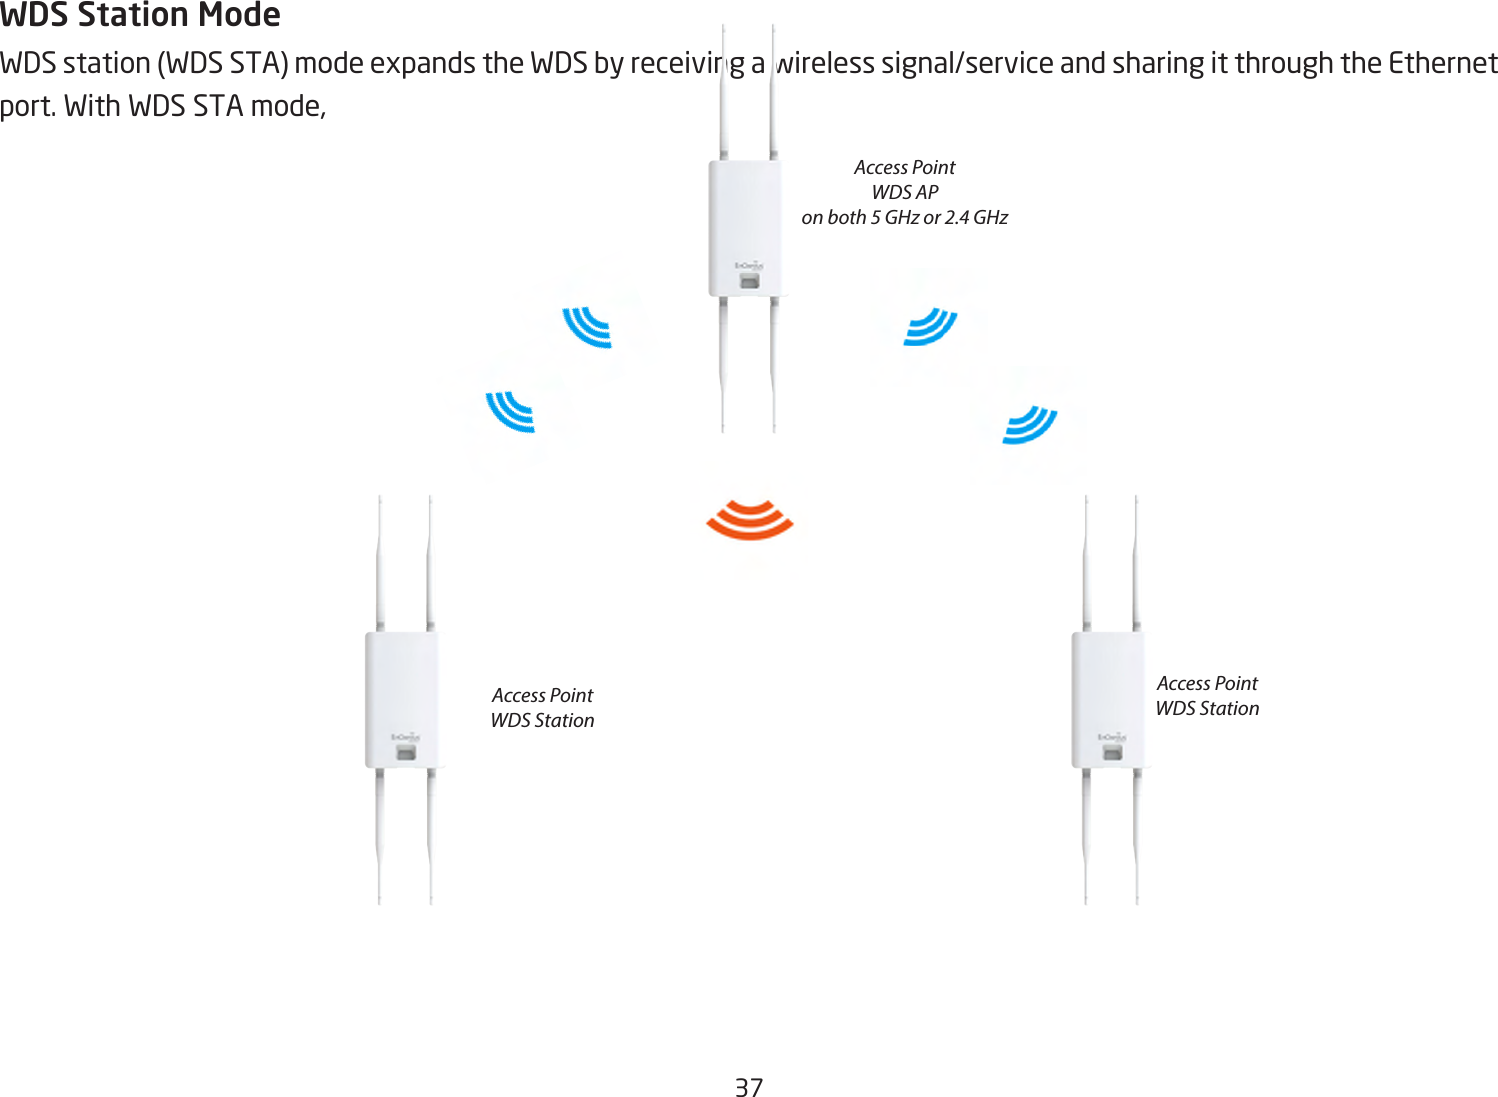 37WDS Station ModeWDSstation(WDSSTA)modeexpandstheWDSbyreceivingawirelesssignal/serviceandsharingitthroughtheEthernetport.WithWDSSTAmode,Access PointWDS APon both 5 GHz or 2.4 GHzAccess PointWDS StationAccess PointWDS Station